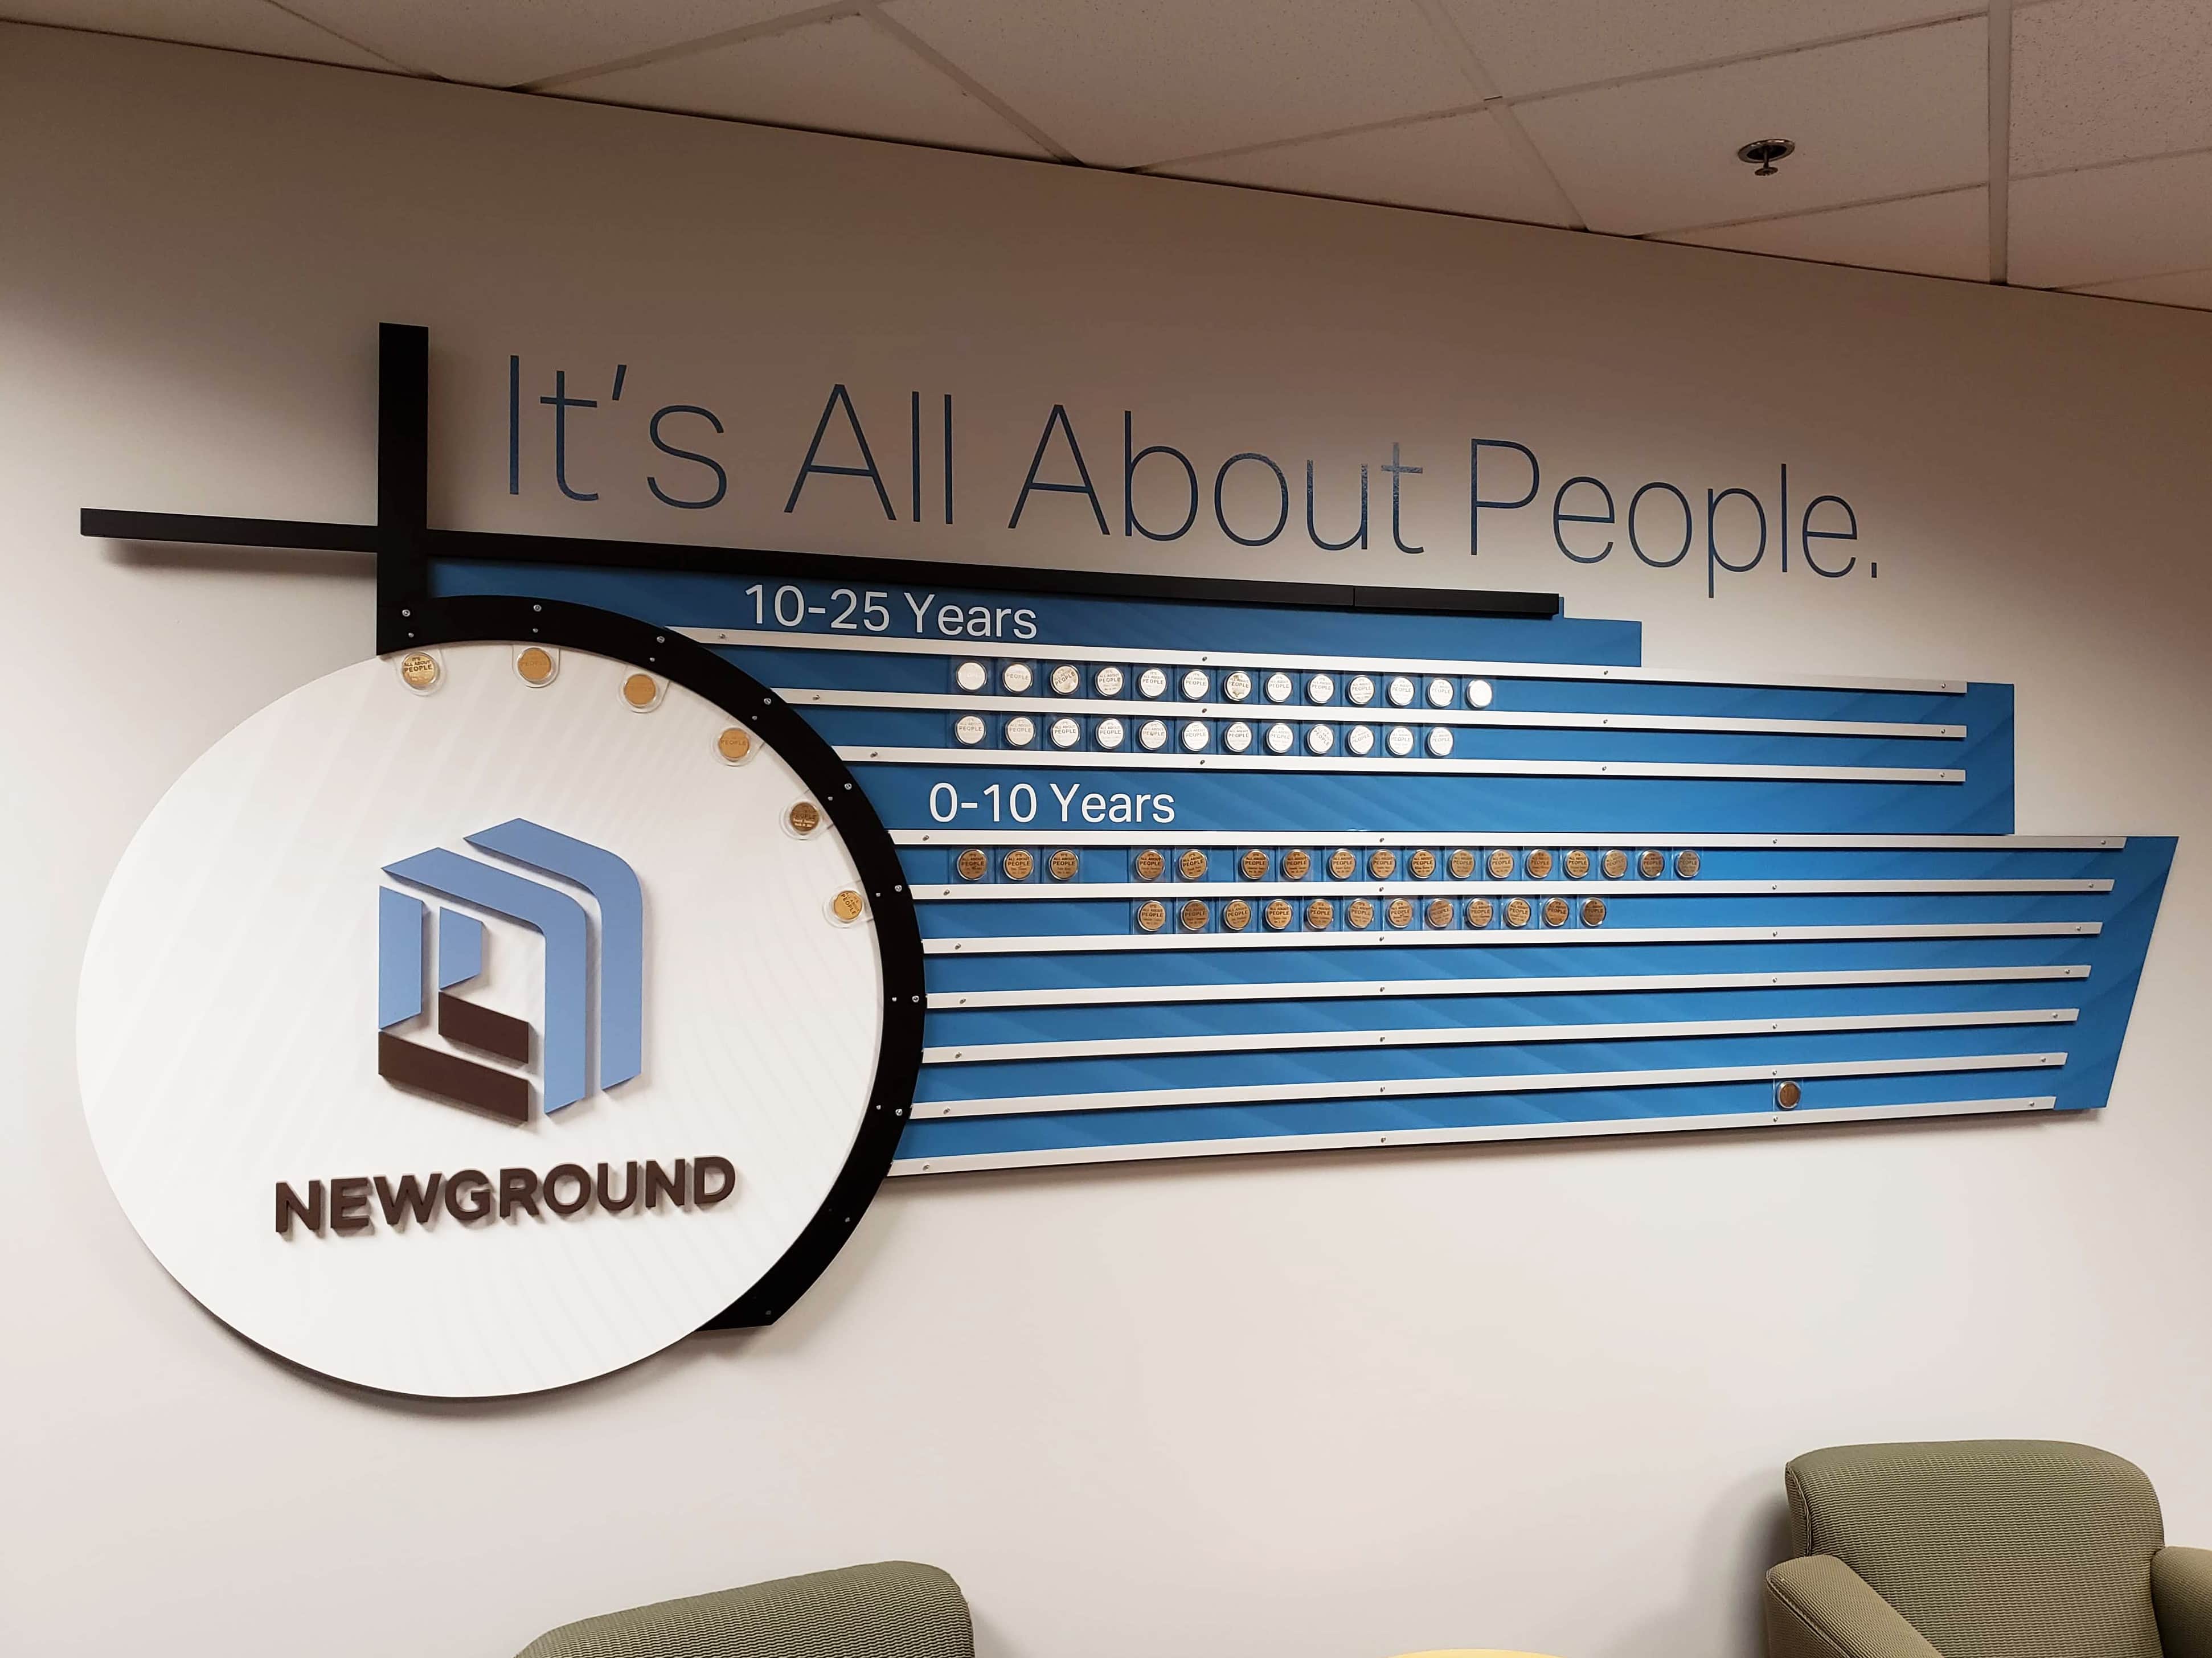 Custom Wall Display for New Ground in St Louis, MO fabricated and installed by 12-Point SignWorks.